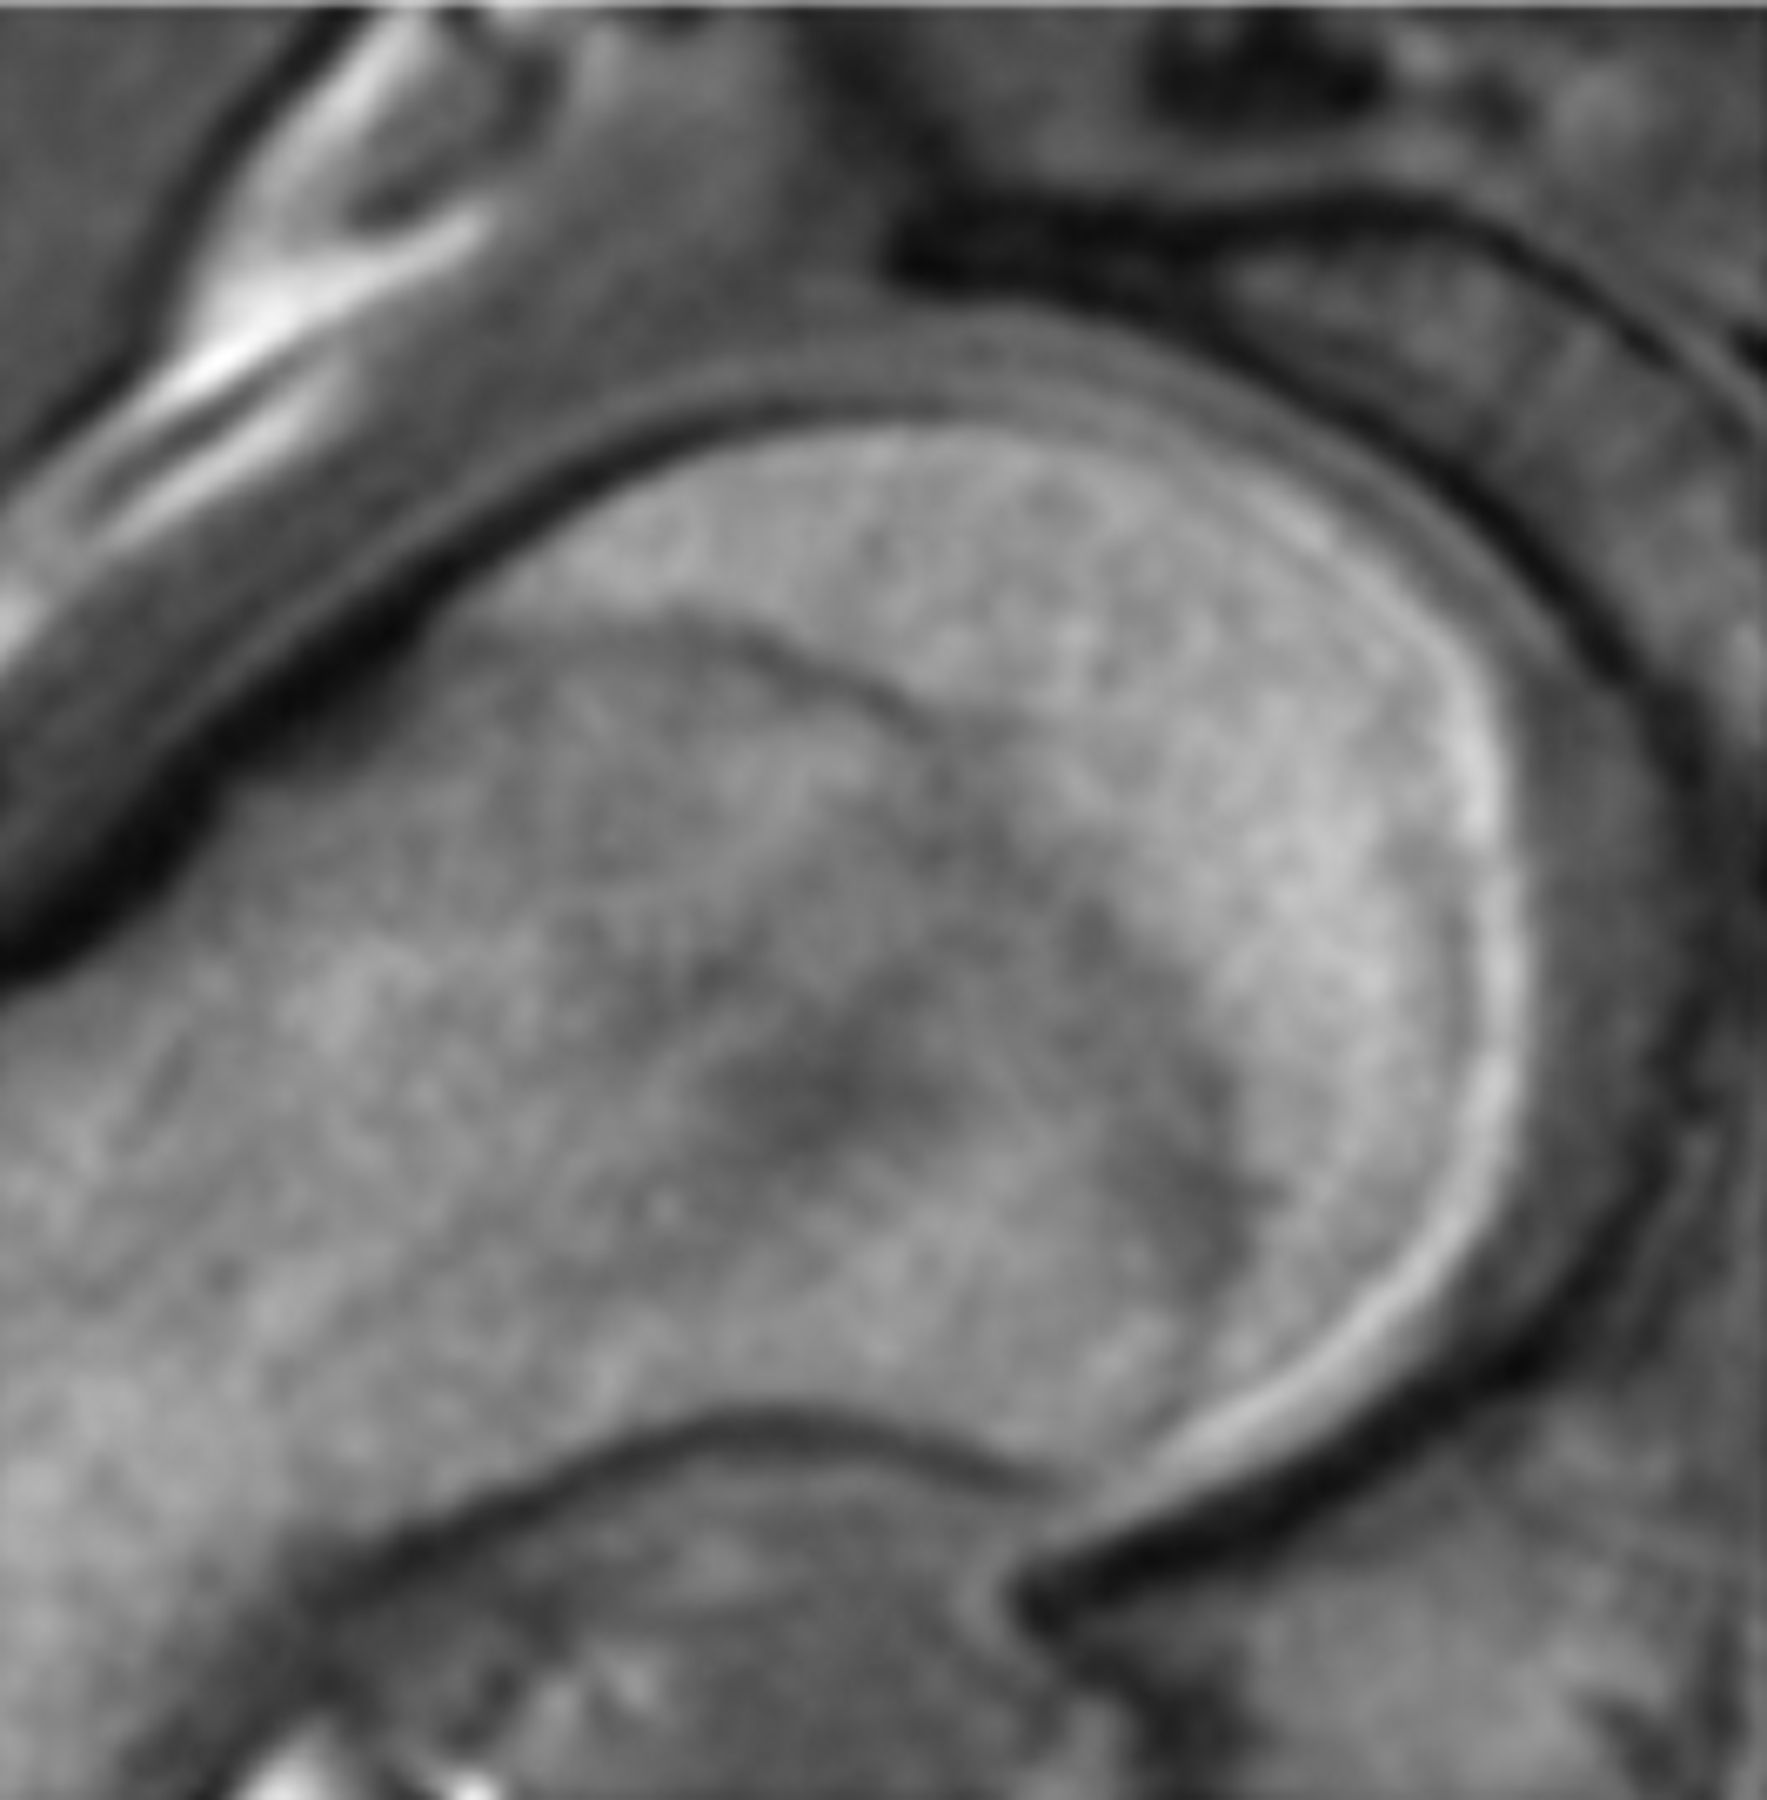 Figs. 2a - 2f 
          Representative MRI images
showing the six physeal grades in study subjects; a) grade 1, b)
grade 2, c) grade 3, d) grade 4, e) grade 5, and f) grade 6.
        